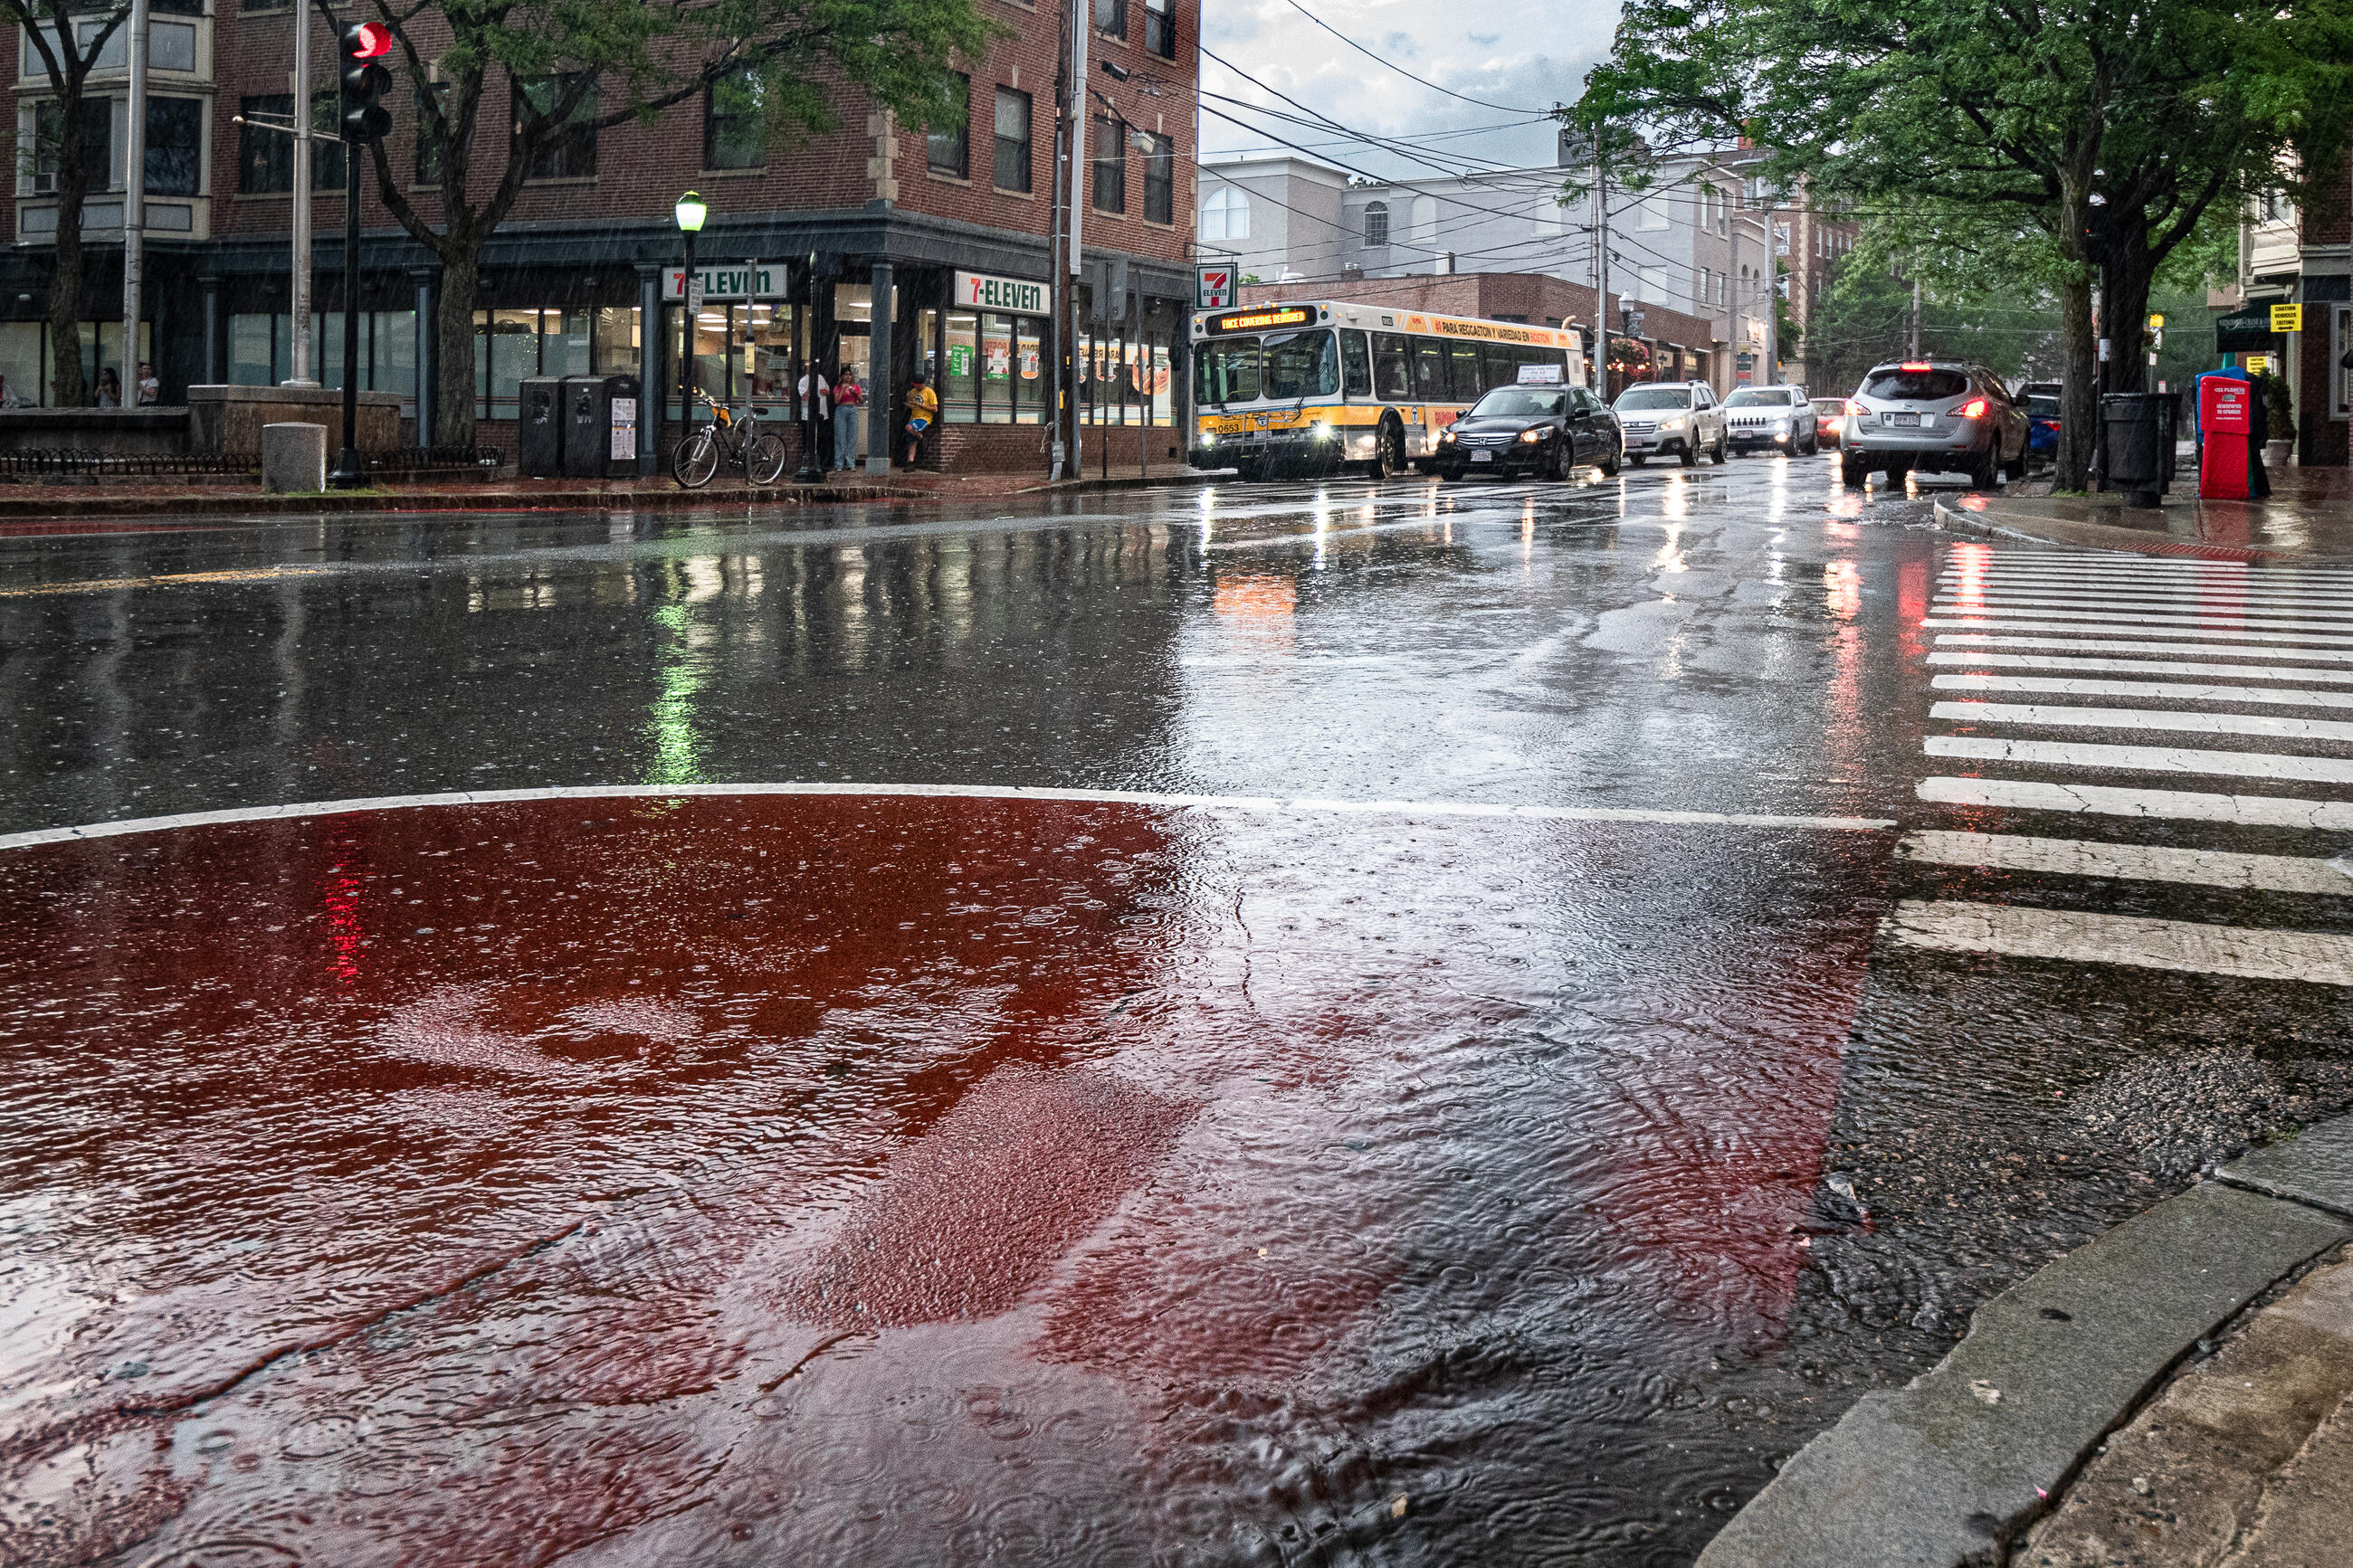 large puddle in Davis Square with rain and MBTA bus in background